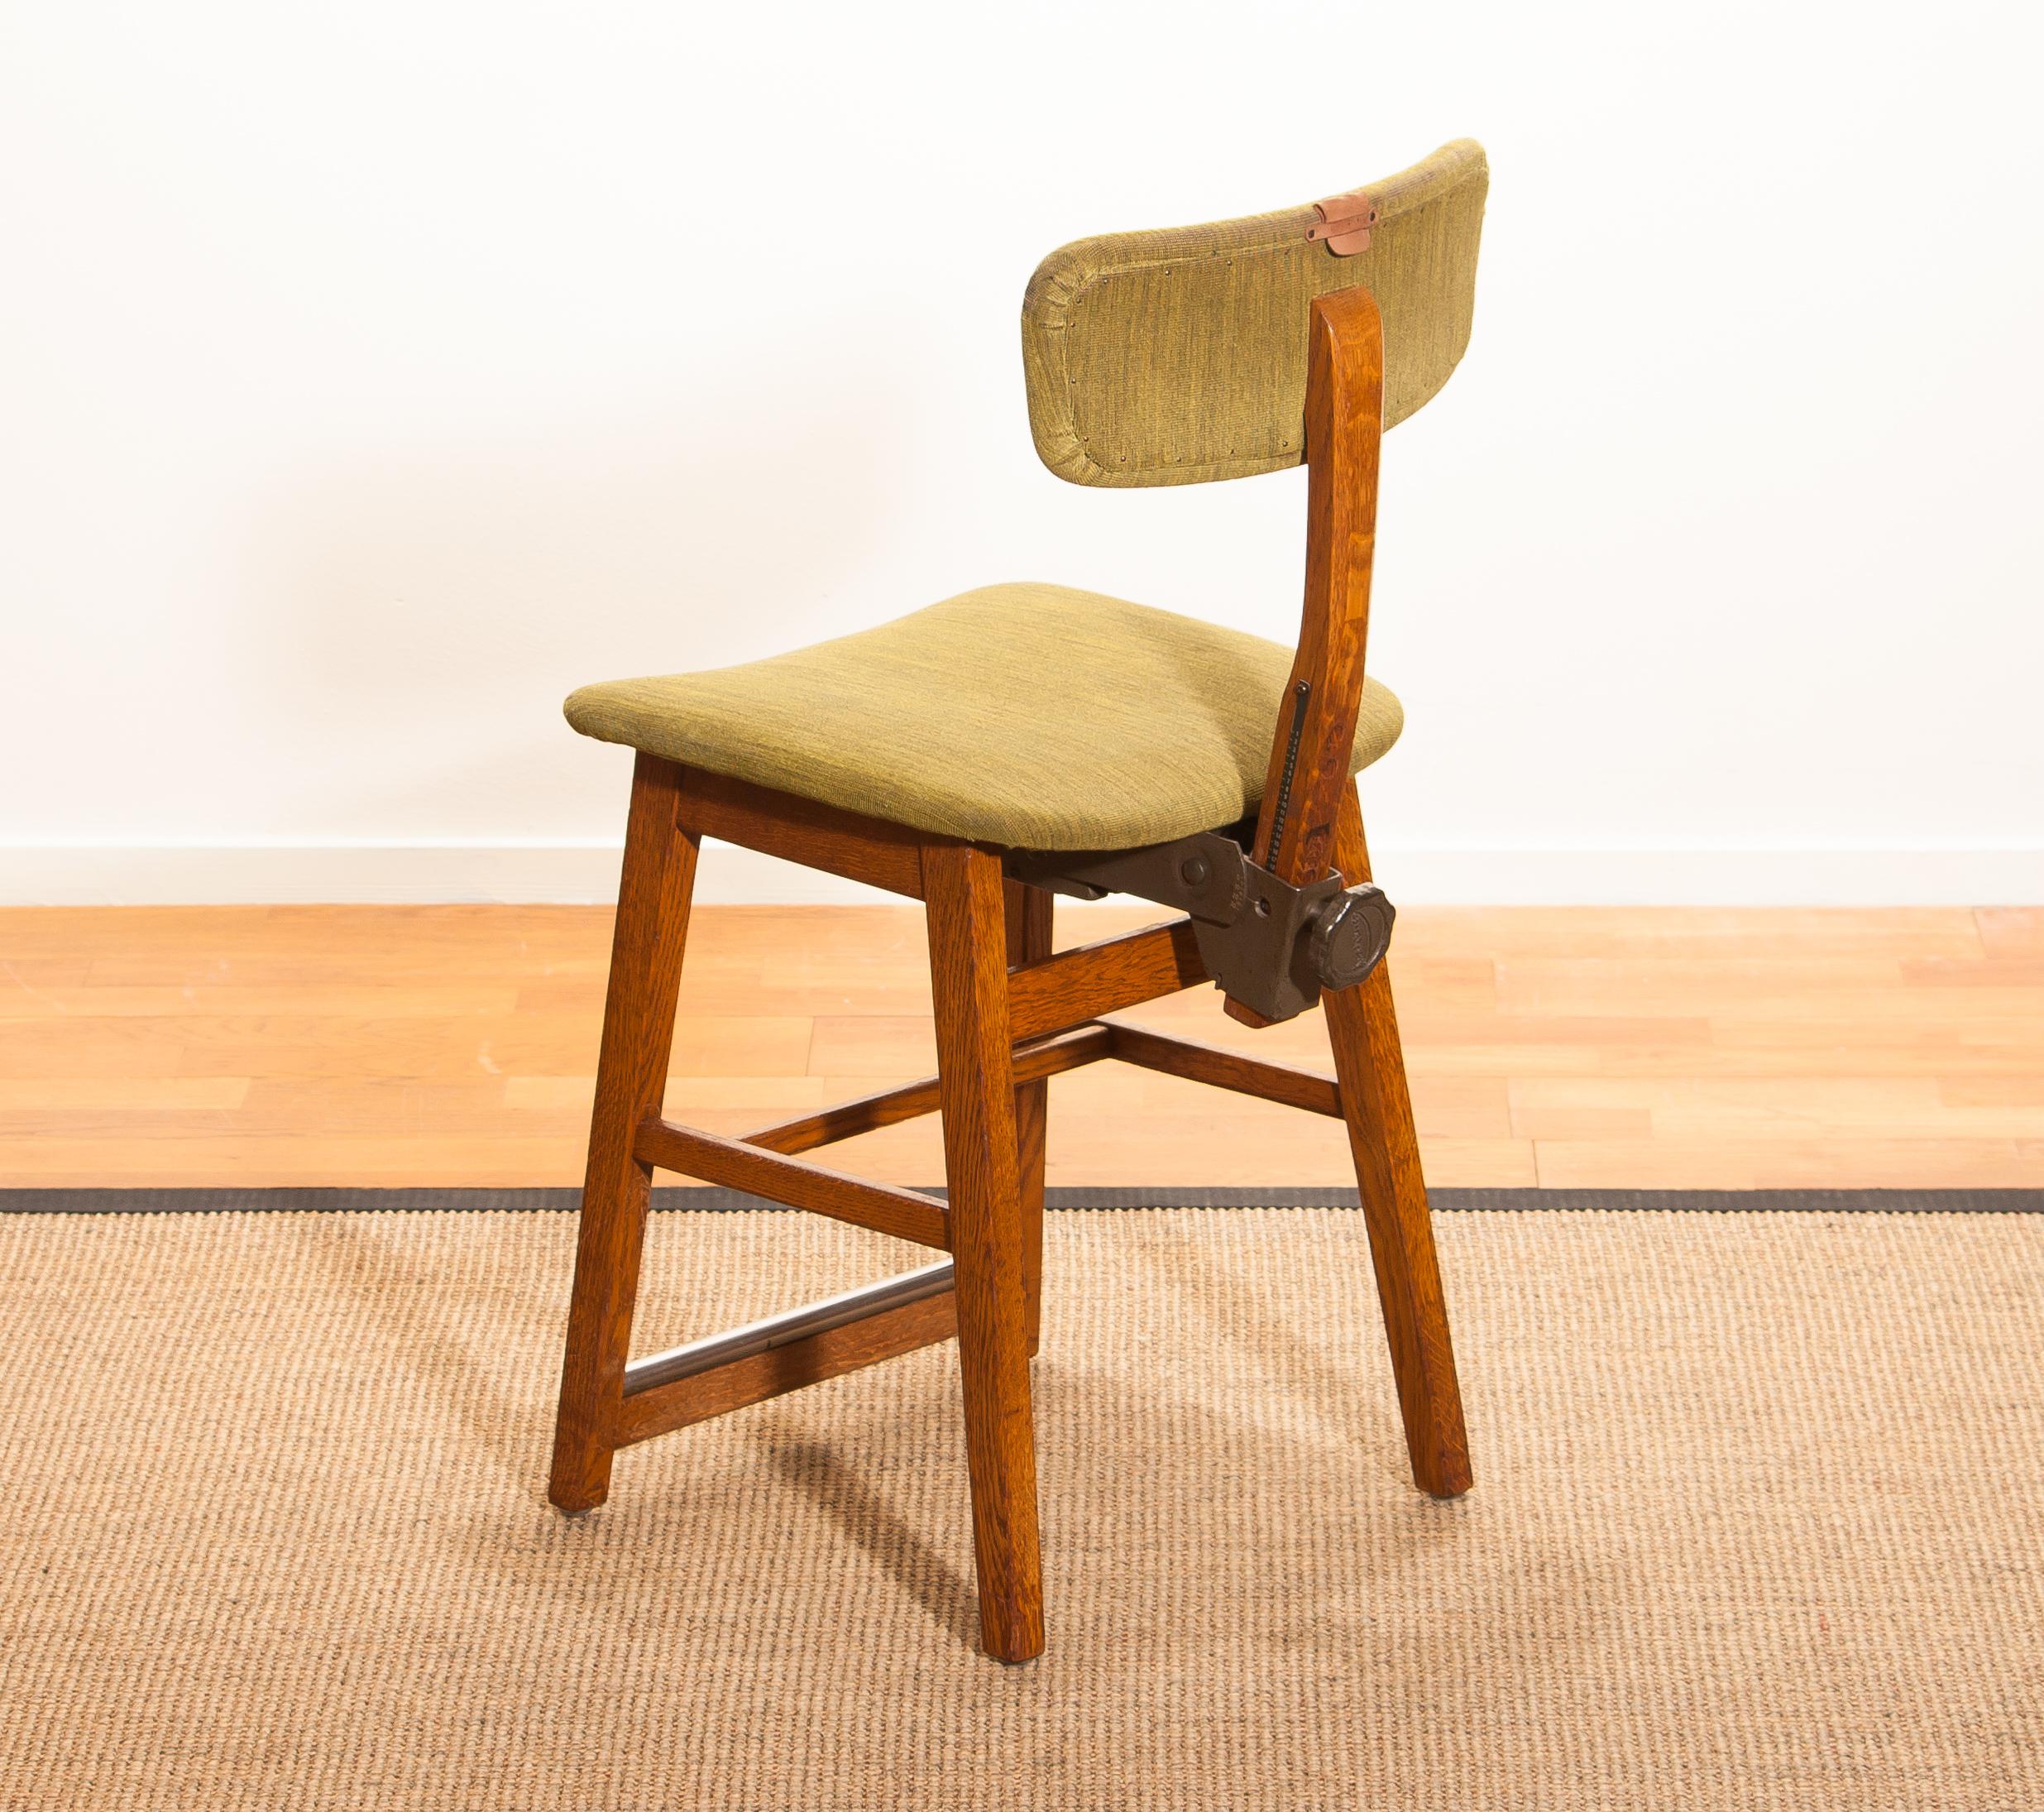 1940s, Oak and Wool Desk Chair by Âtvidabergs, Sweden 1